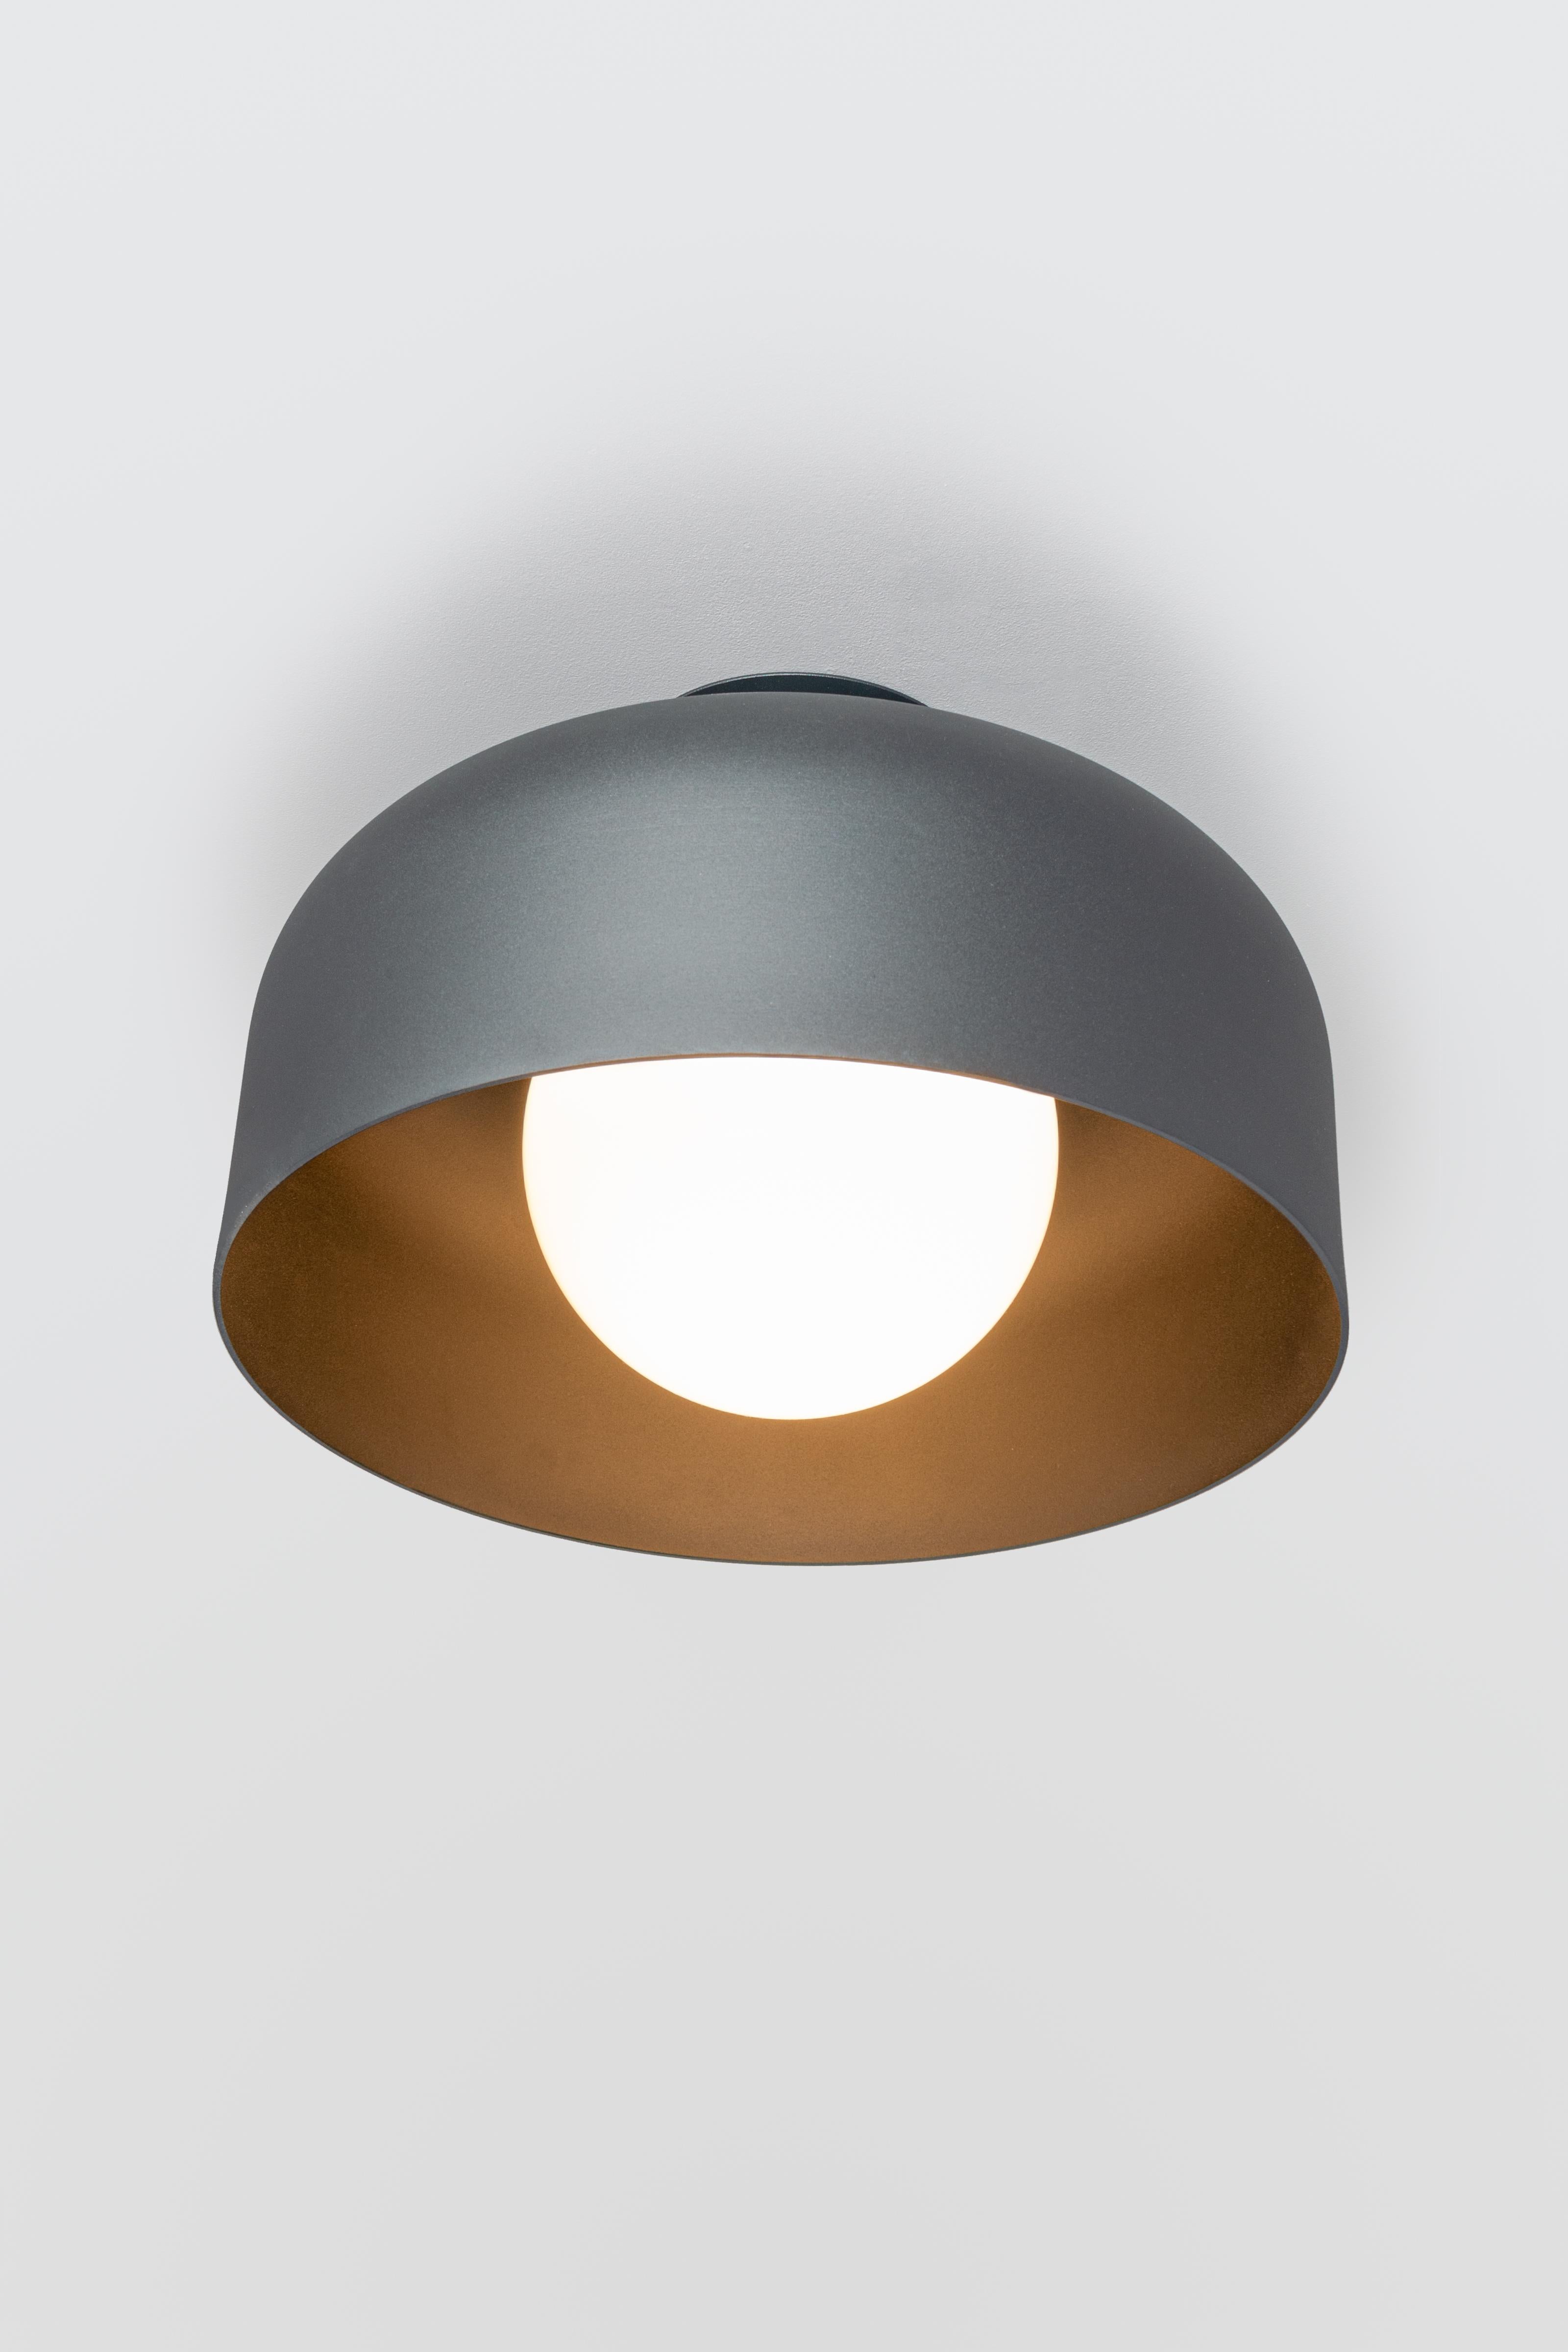 SPOTLIGHT VOLUMES, ceiling lamp / wall lamp
Design: Lukas Peet, Editor: ANDLight
UL Listed

Model shown: E

The Spotlight Volumes series shows five unique spun aluminum shade profiles that range from wide to narrow, creating various distinct